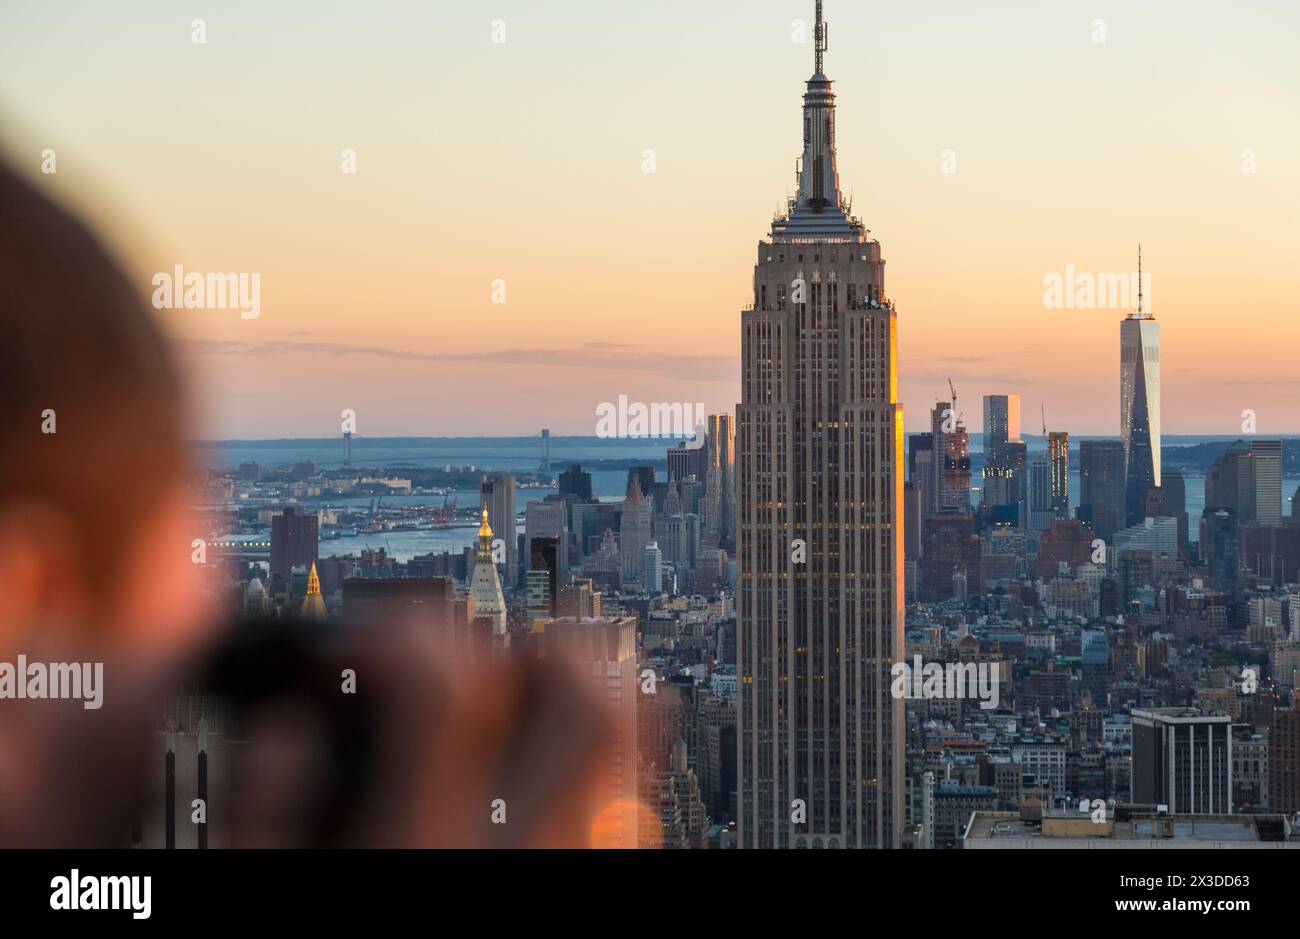 Man with camera photographing view over Empire State Building and skyline, Manhattan, New York, U.S.A Stock Photo